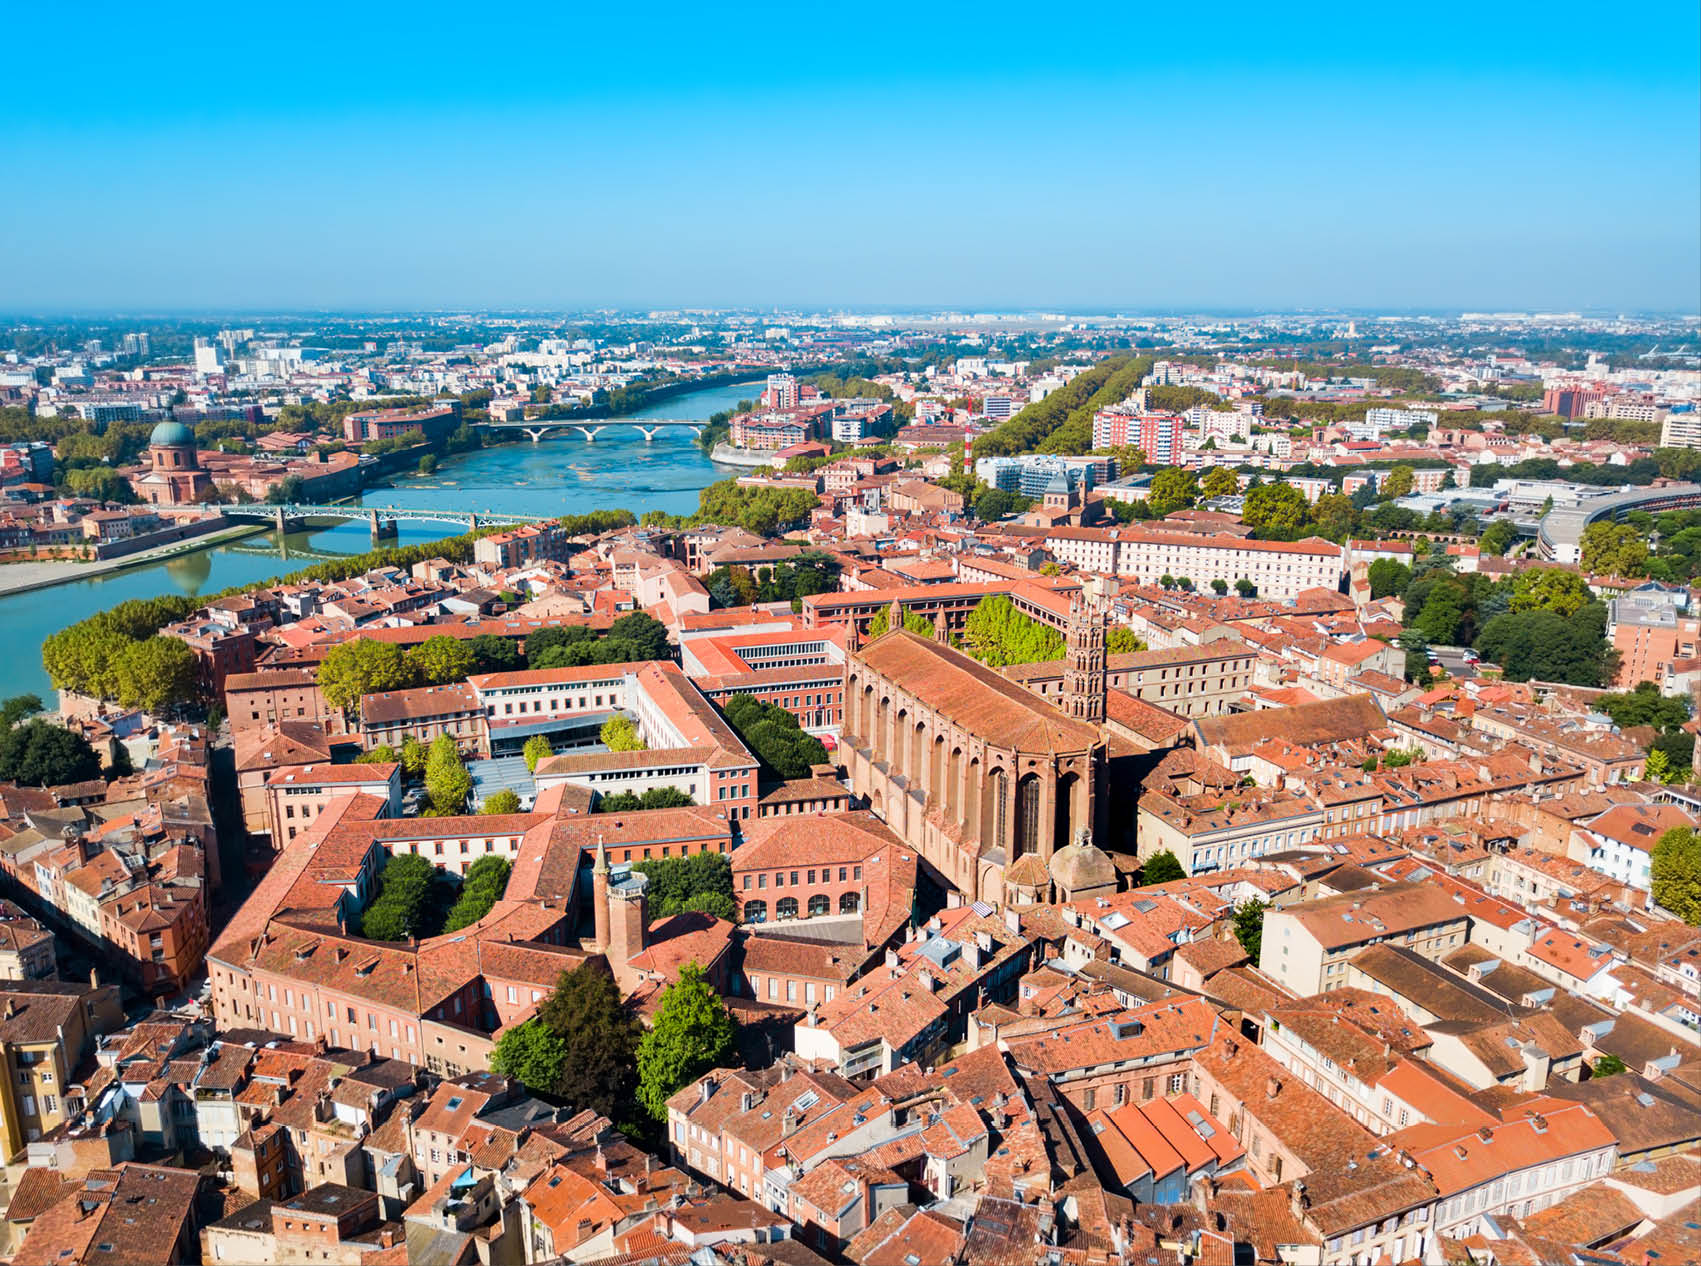 Church of the Jacobins aerial panoramic view, a Roman Catholic church located in Toulouse city, France